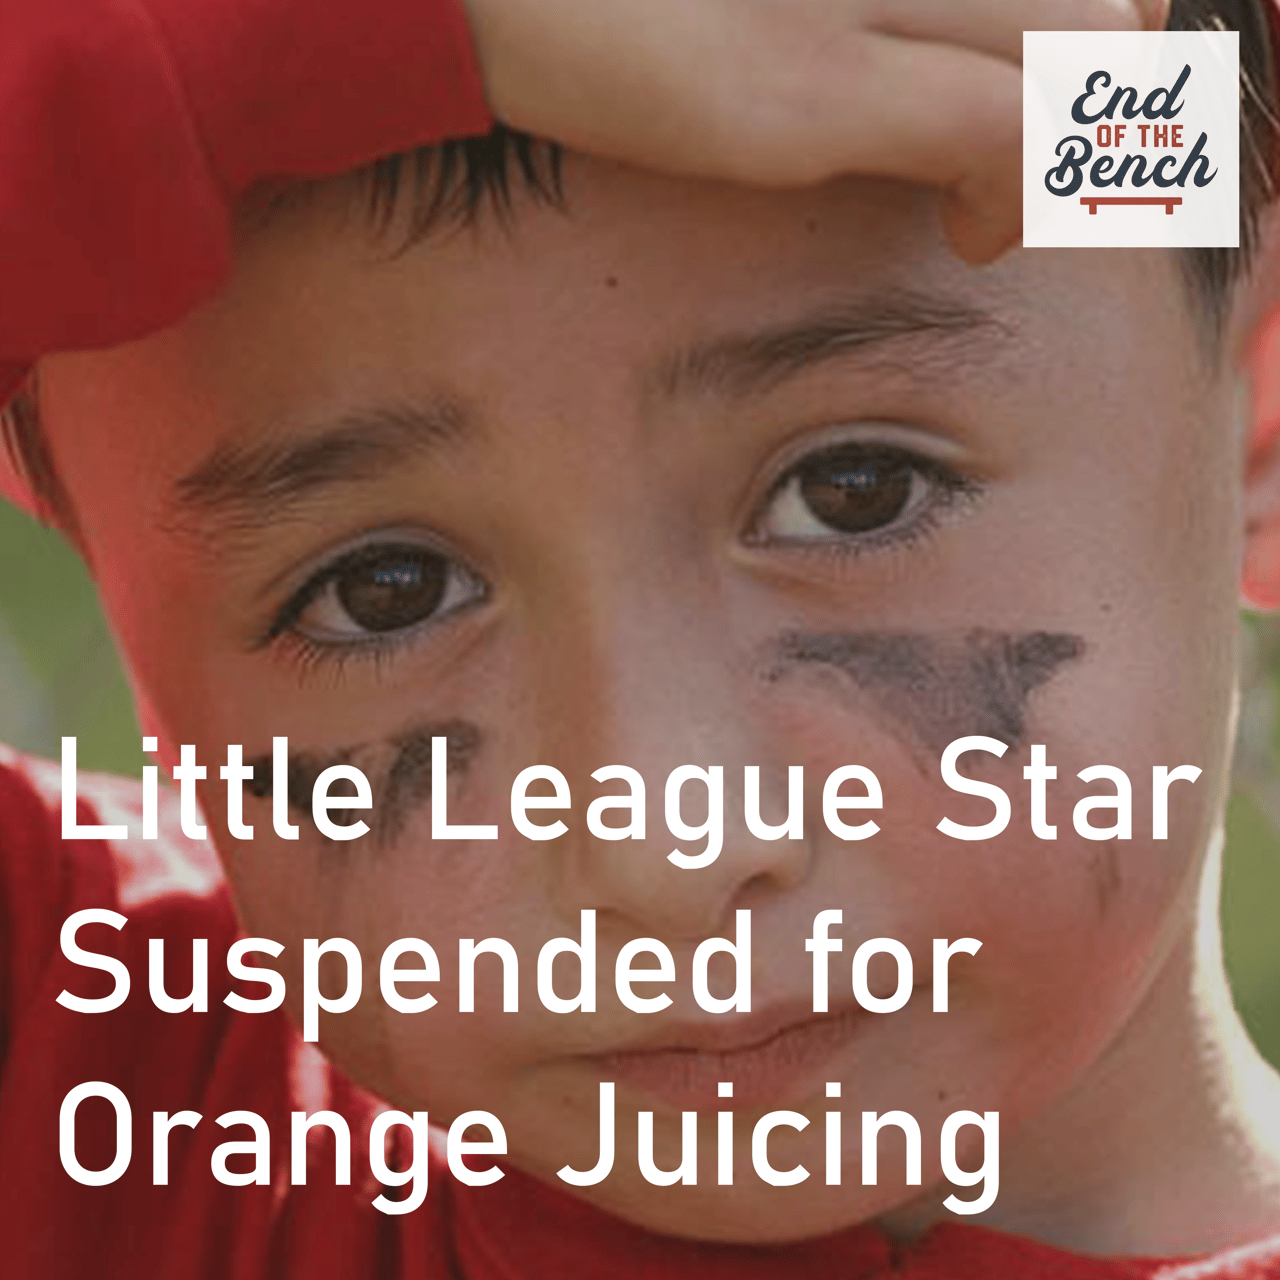 A child looks listlessly forward wearing baseball attire. The article's is overlain atop and says "Little League Star Suspended for Orange Juicing"